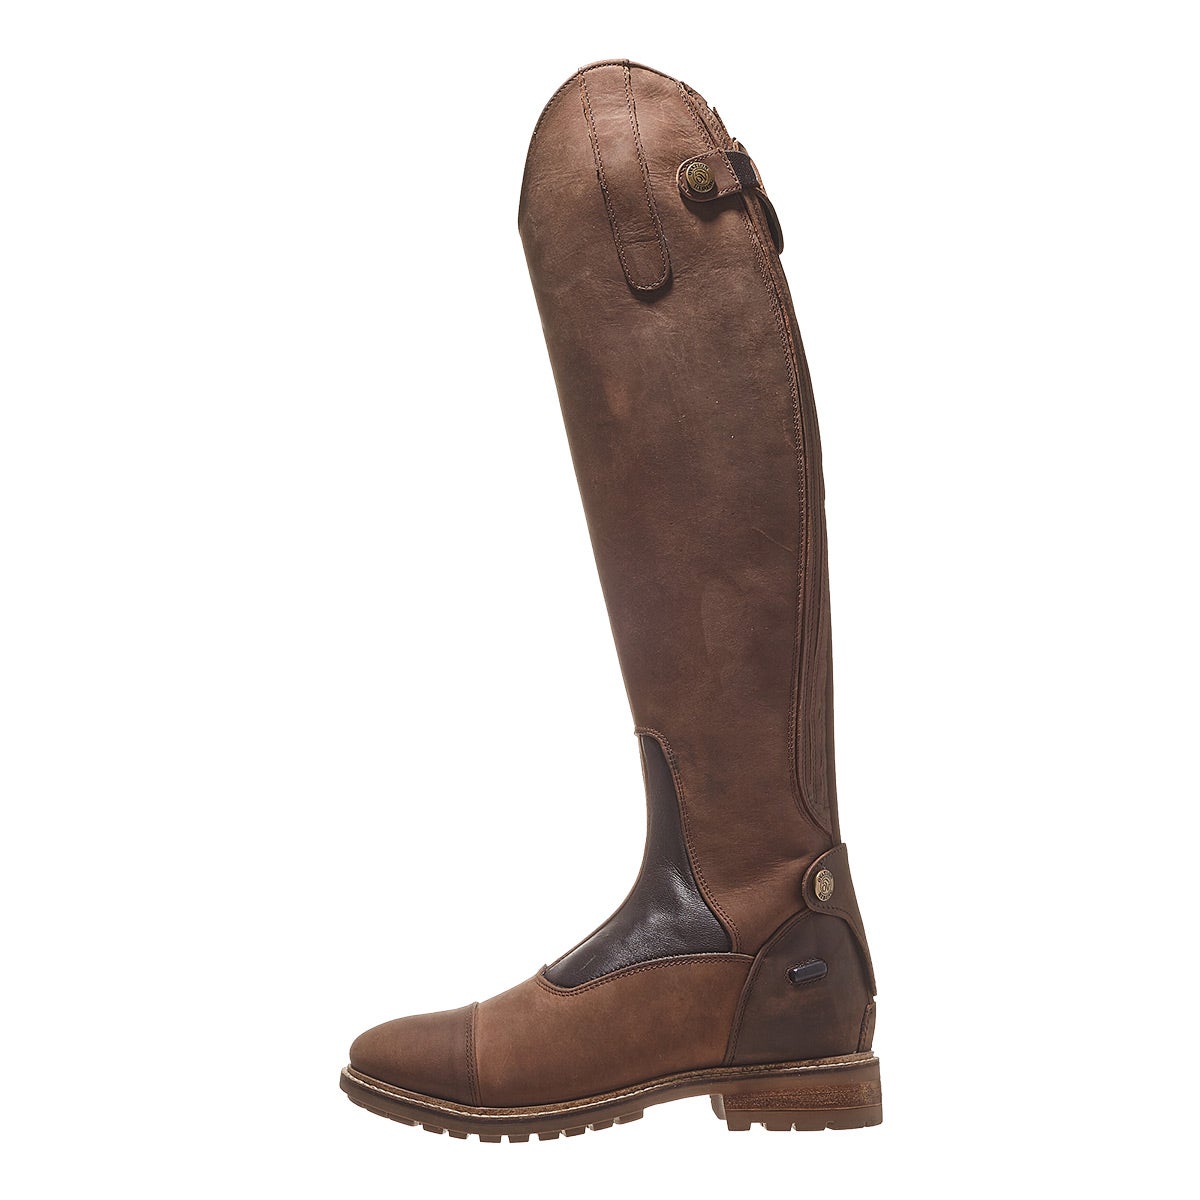 Ovation Coventry Tall Rider Boots - Brown 360° View - Riding Warehouse